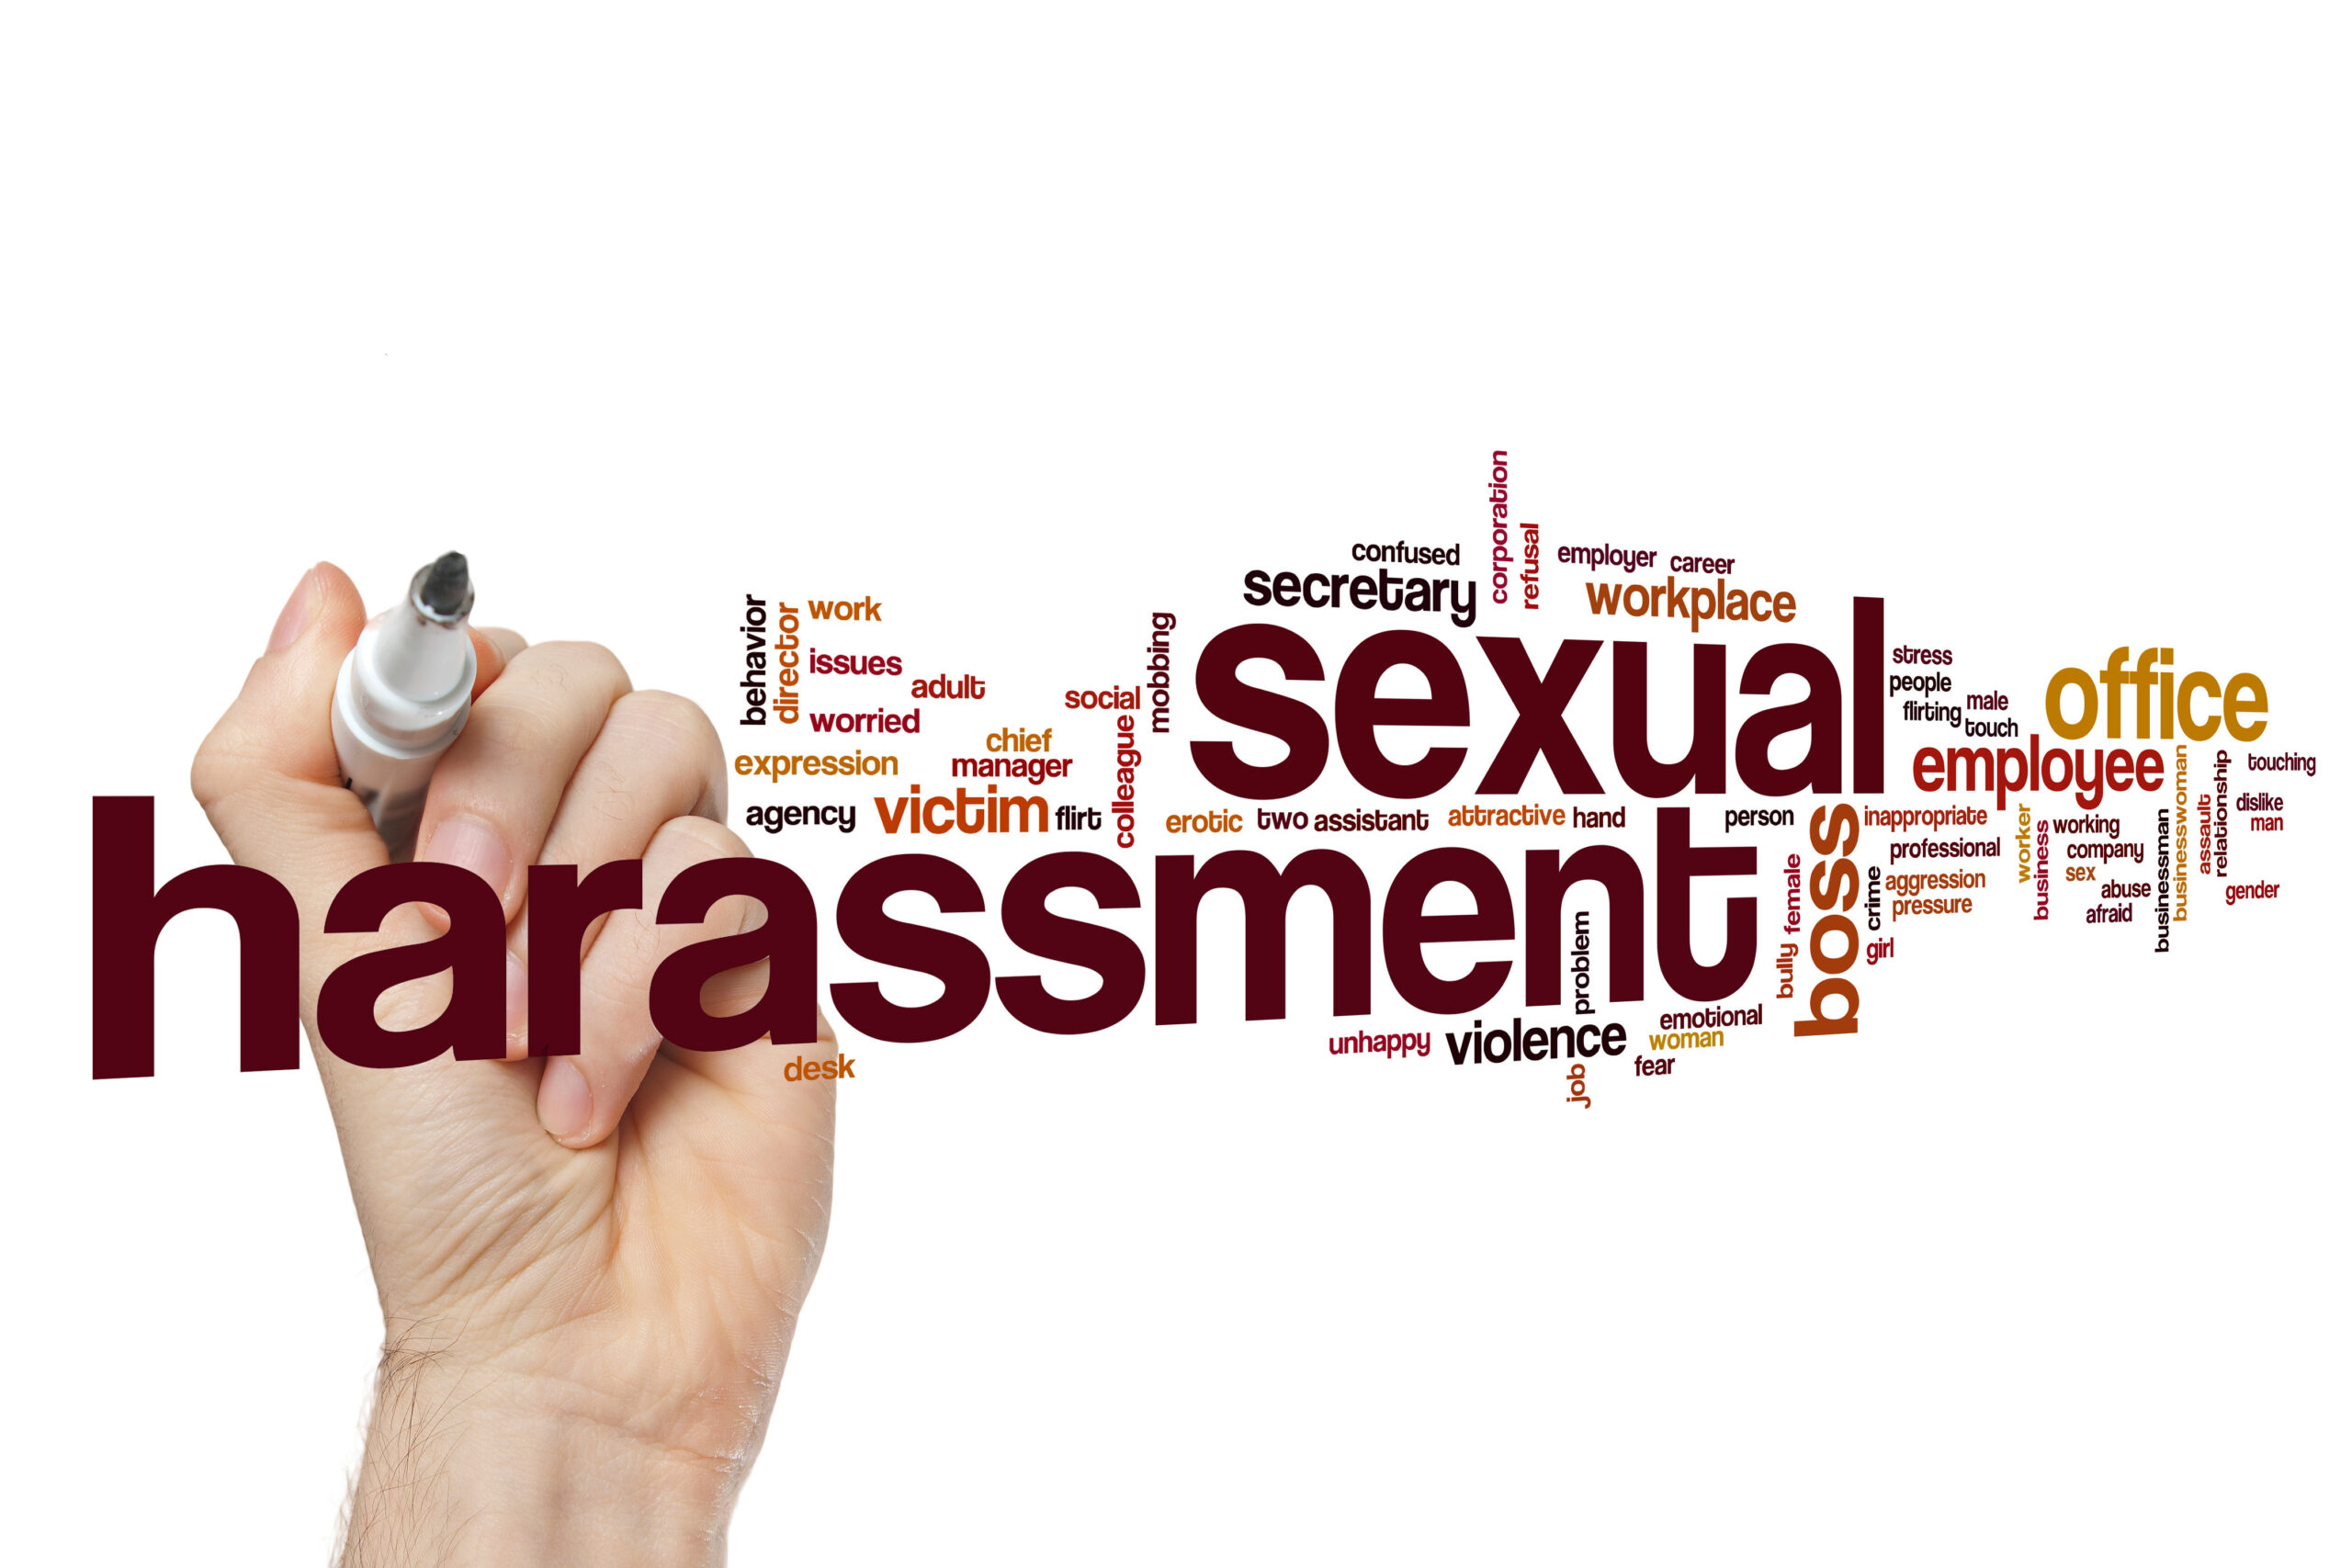 Harassment Archives Easleylaw